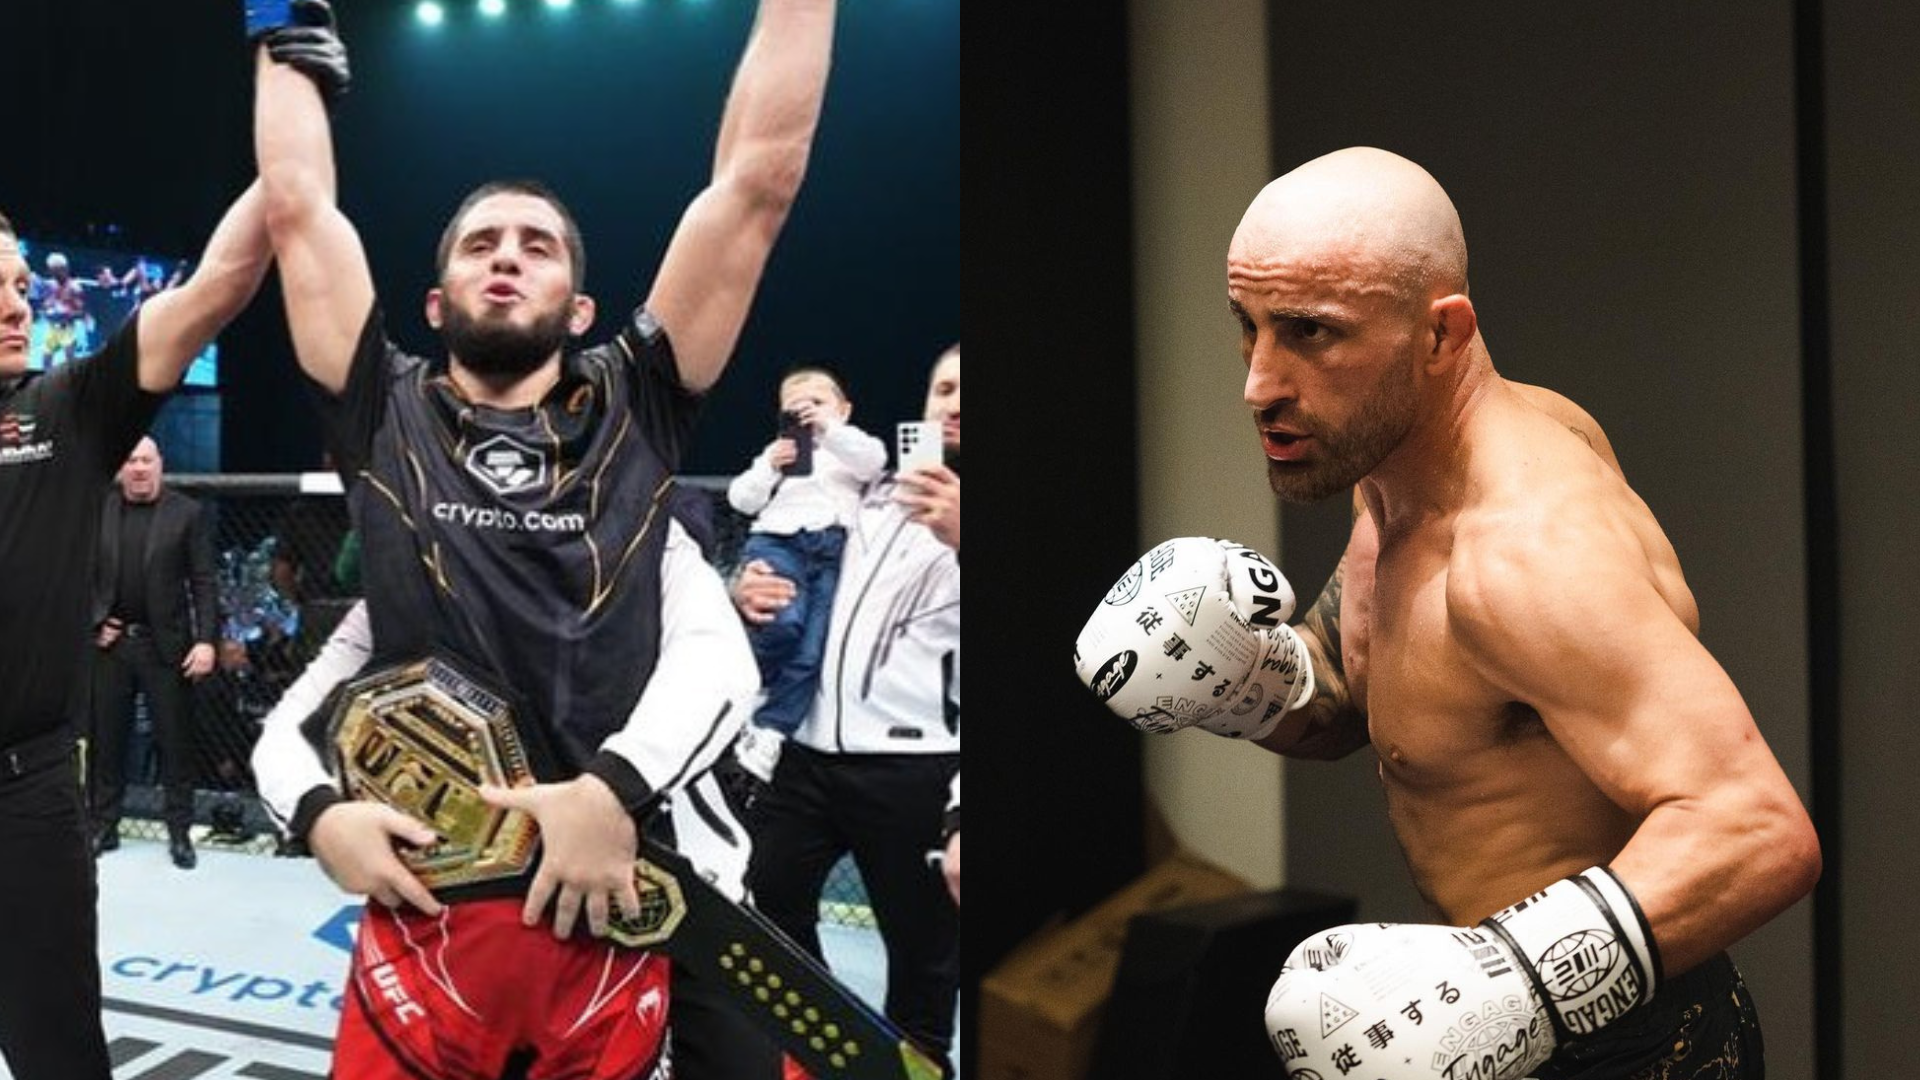 UFC 284 tickets: Where and how to buy tickets for Islam Makhachev vs Alexander Volkanovski?